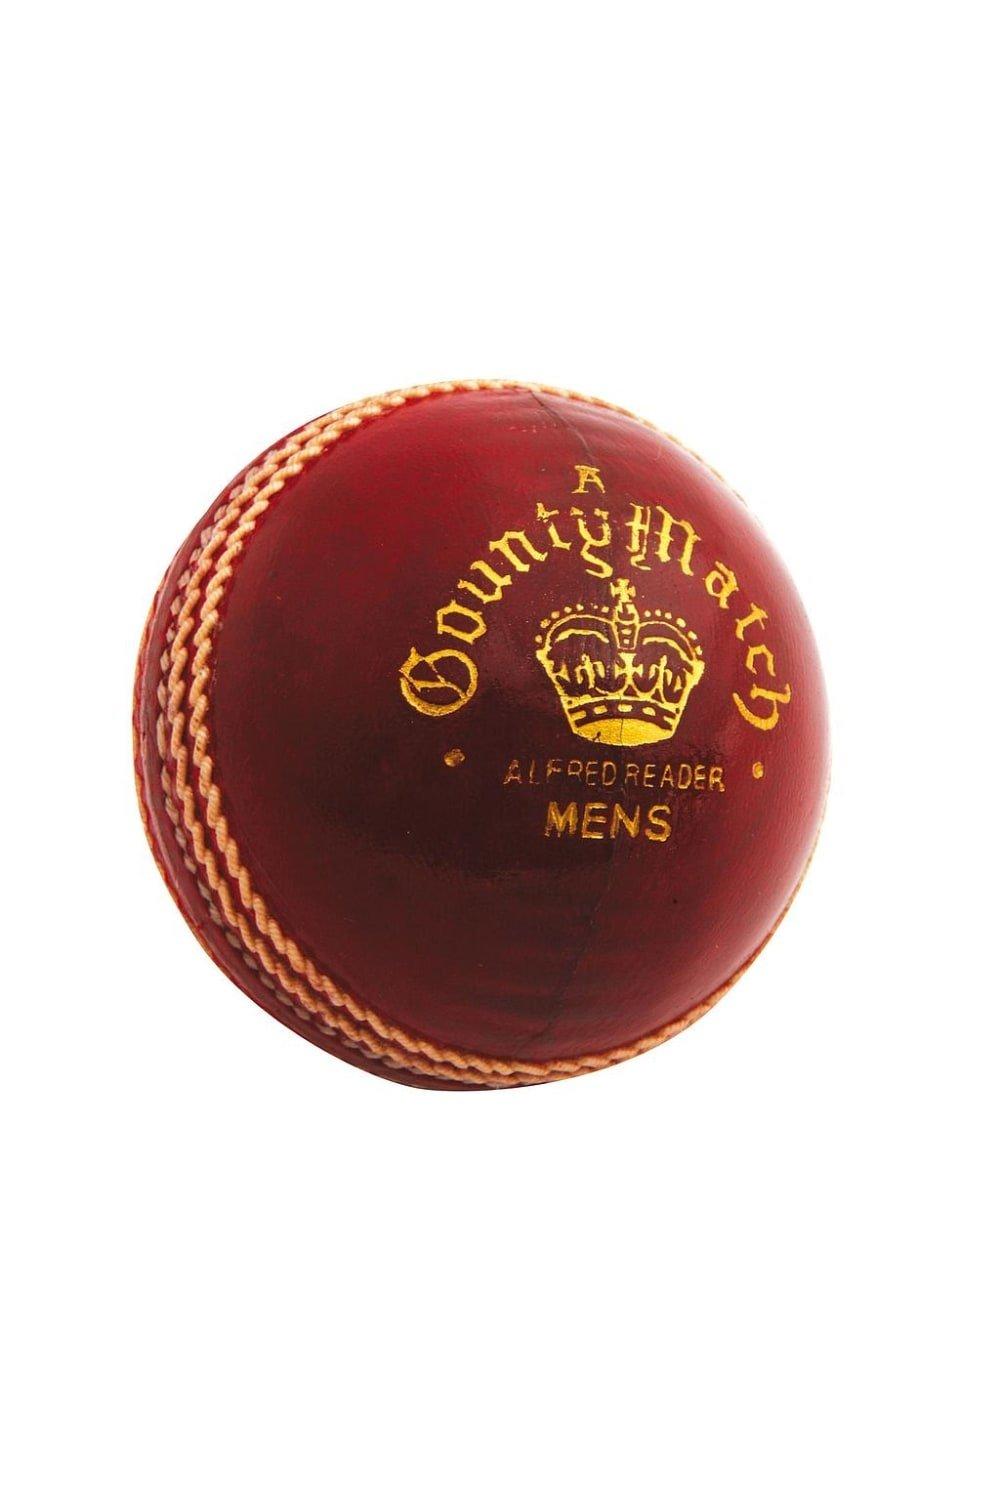 County Match A Leather Cricket Ball